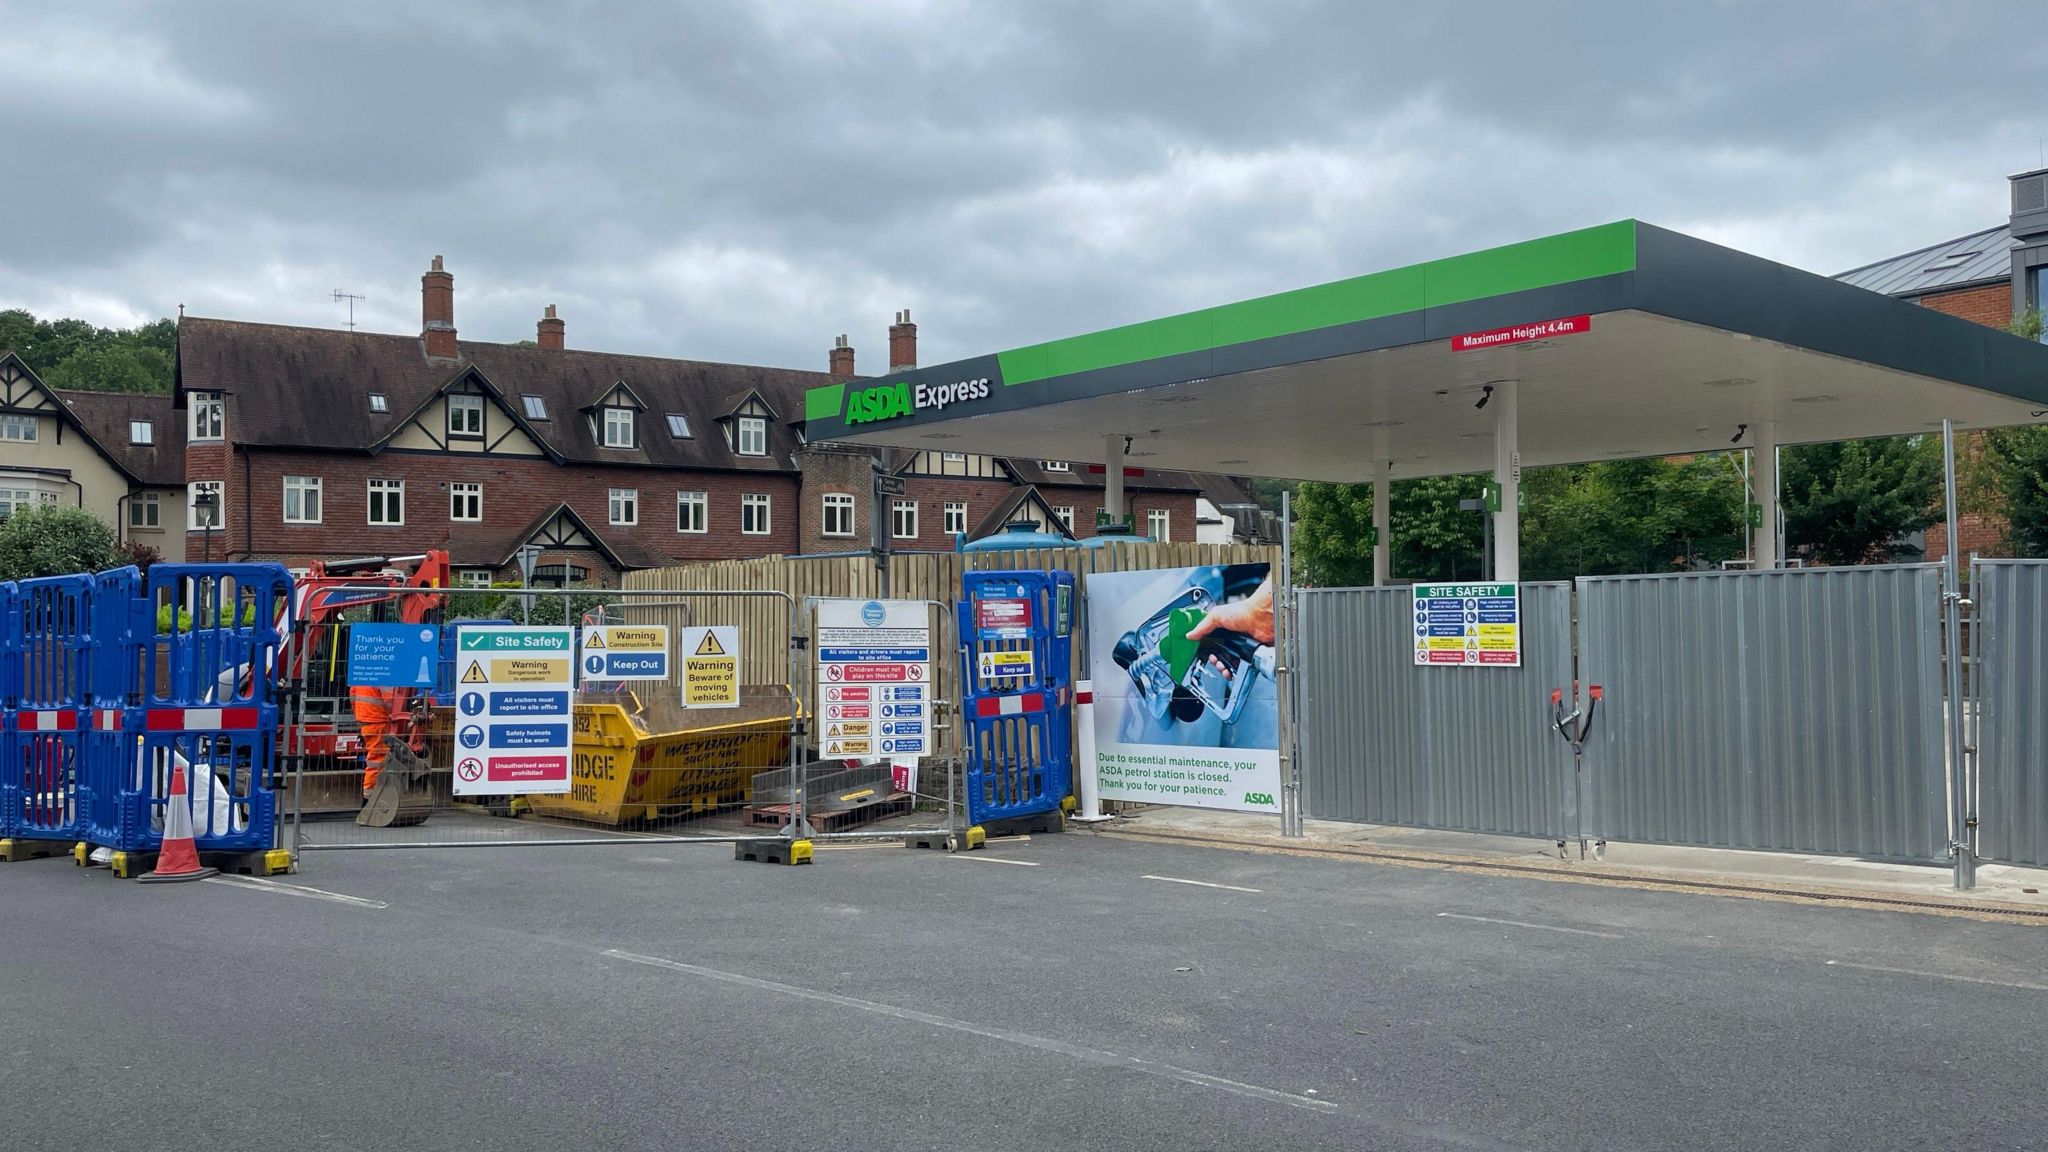 The impacted petrol station